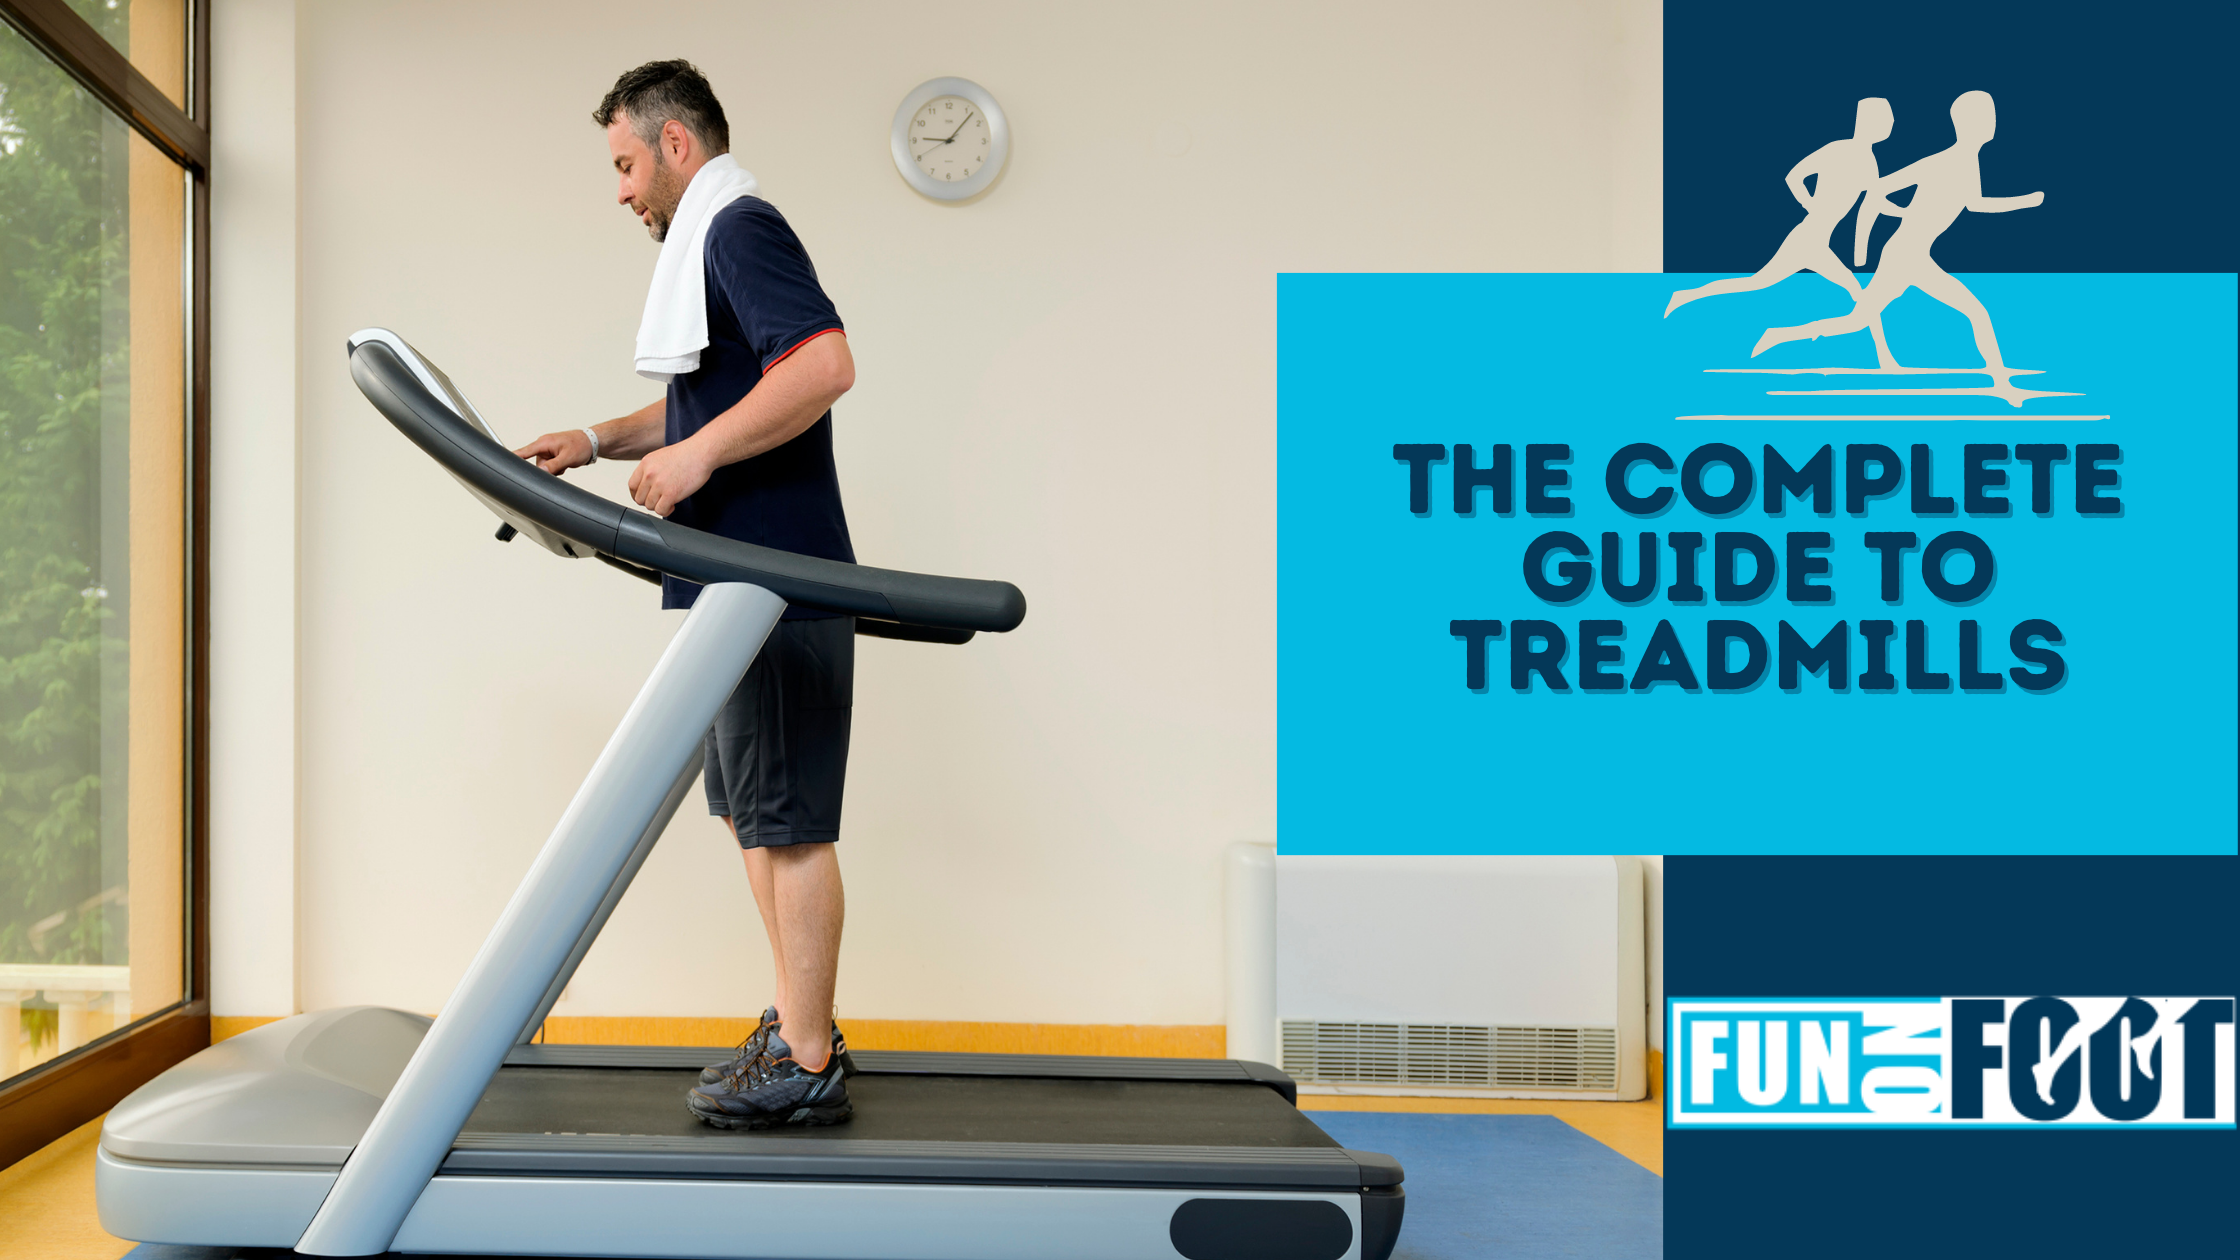 The Complete Guide to Treadmills - FunOnFoot.com